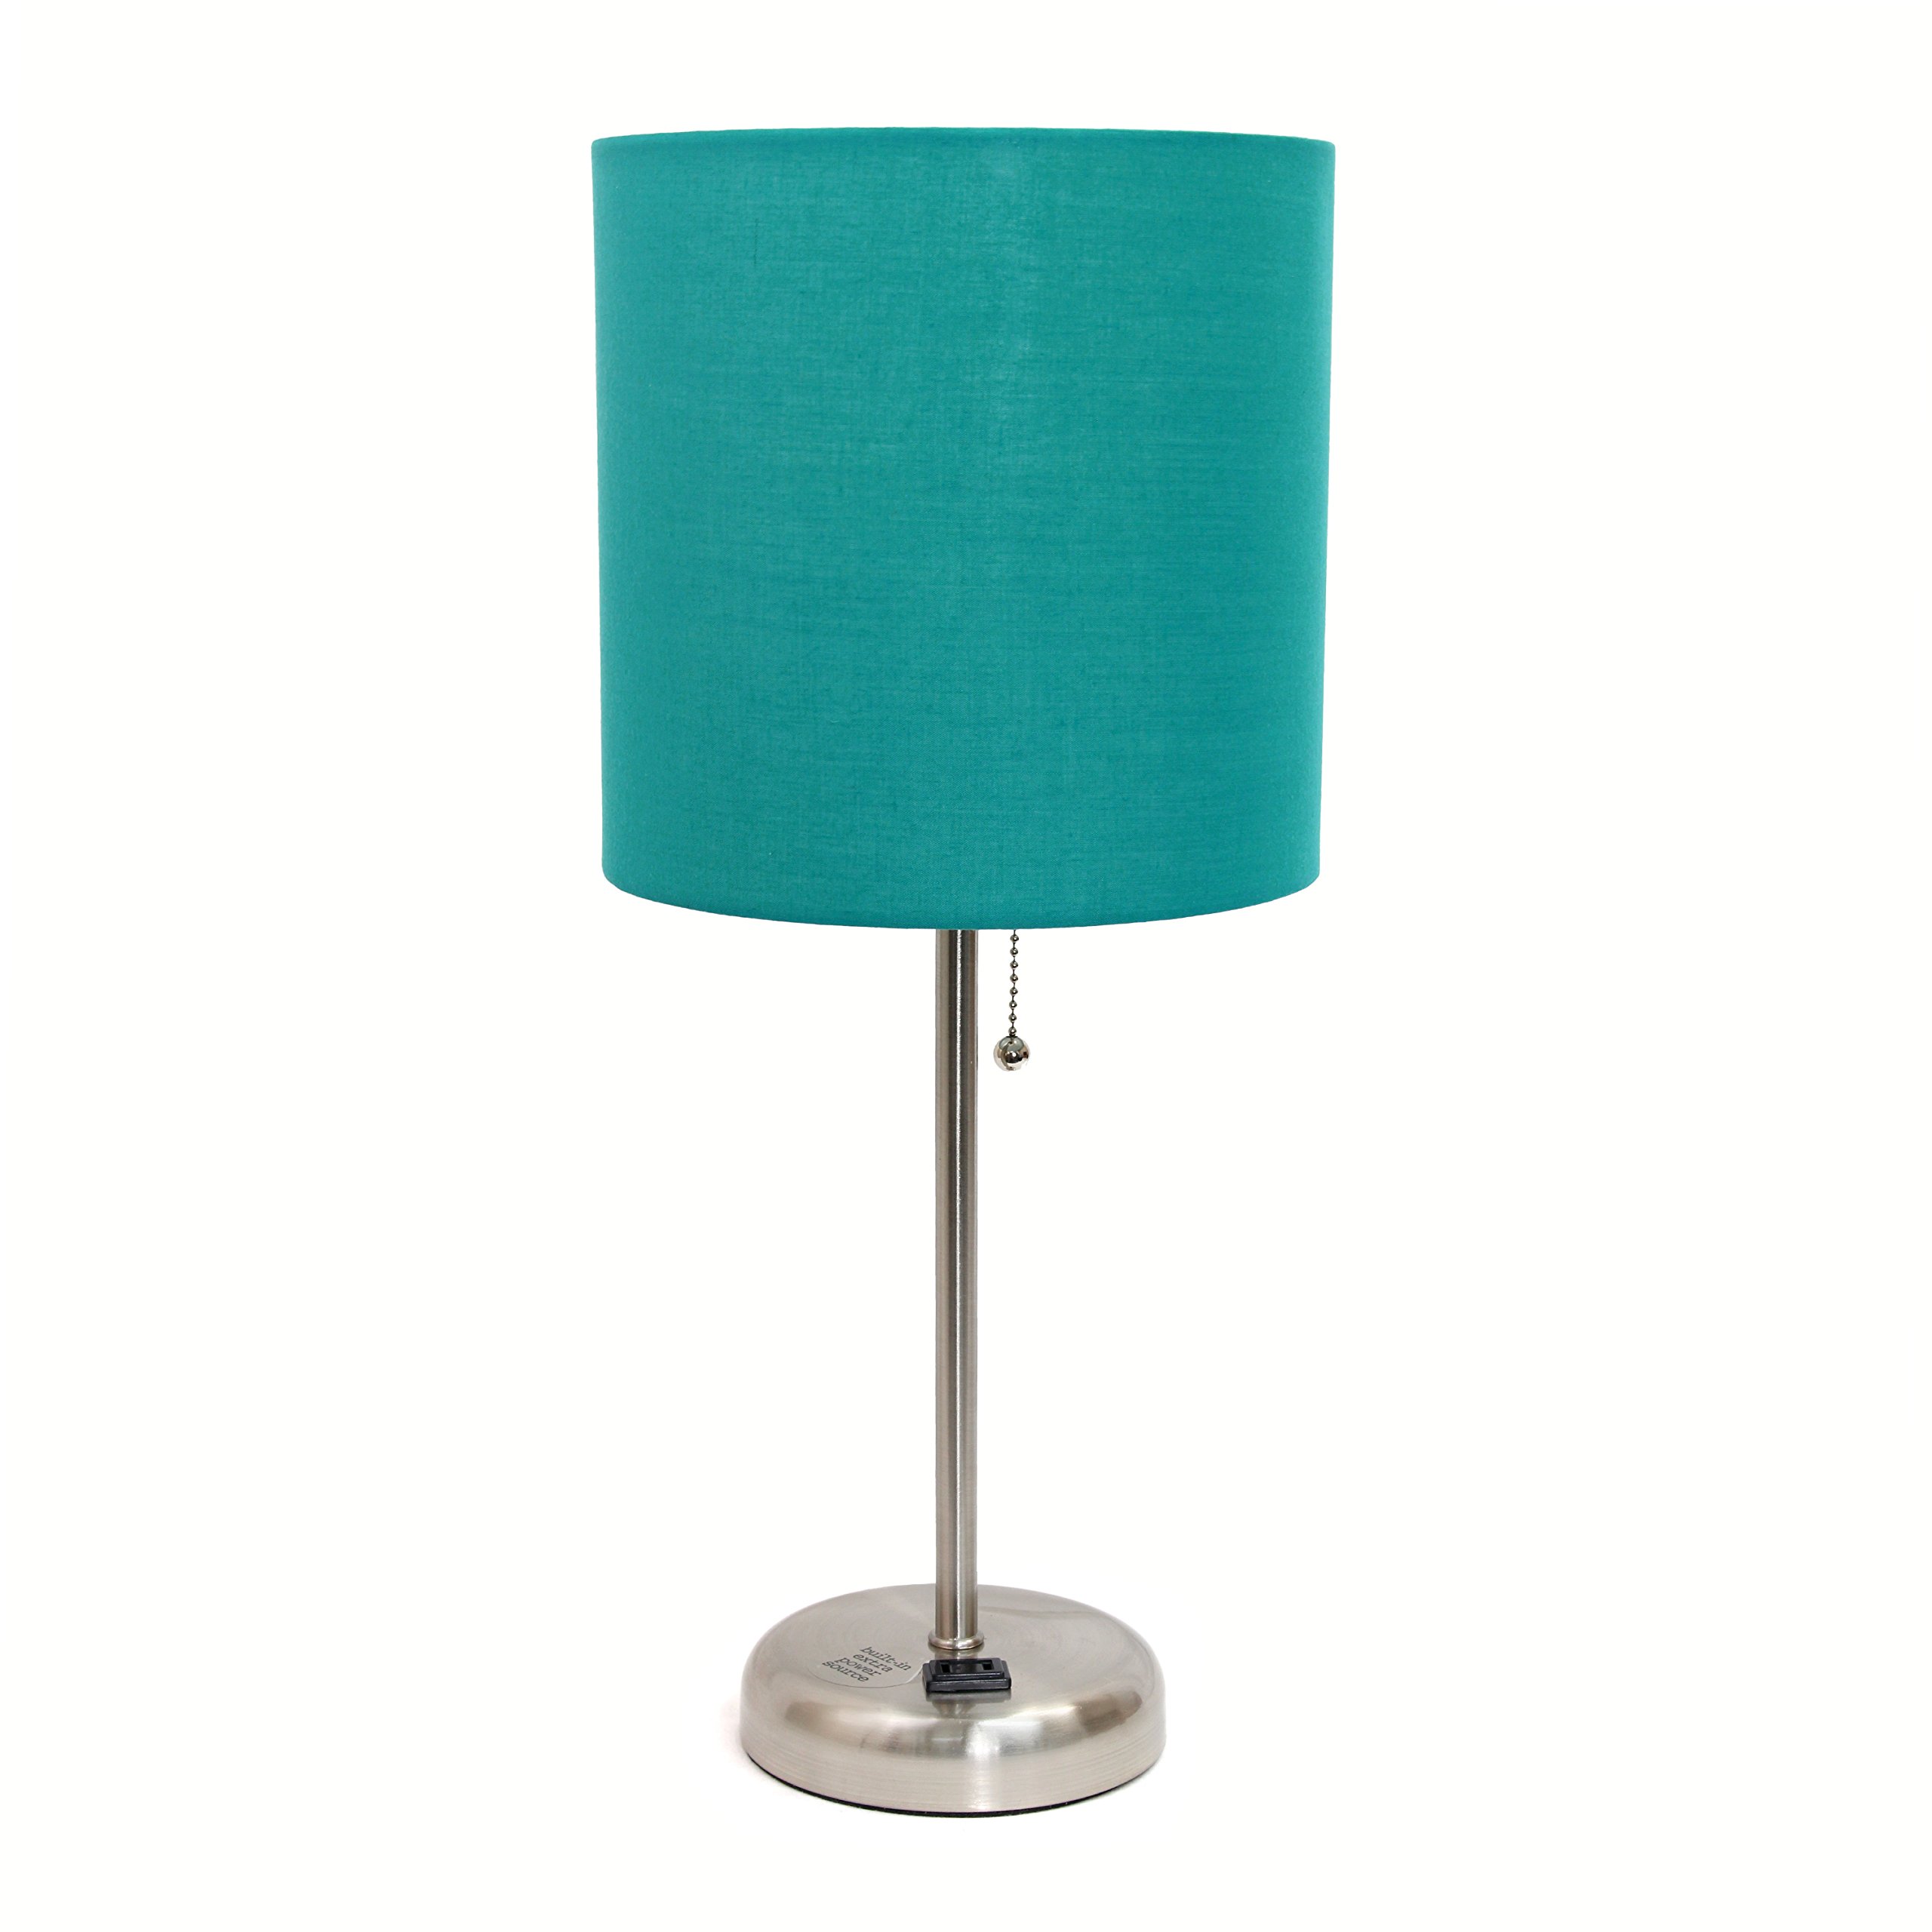 Limelights LT2024-TEL Stick Charging Outlet and Fabric Table Lamp, 19.50 x 8.50 x 8.50 inches, Brushed Steel Base/Teal Shade